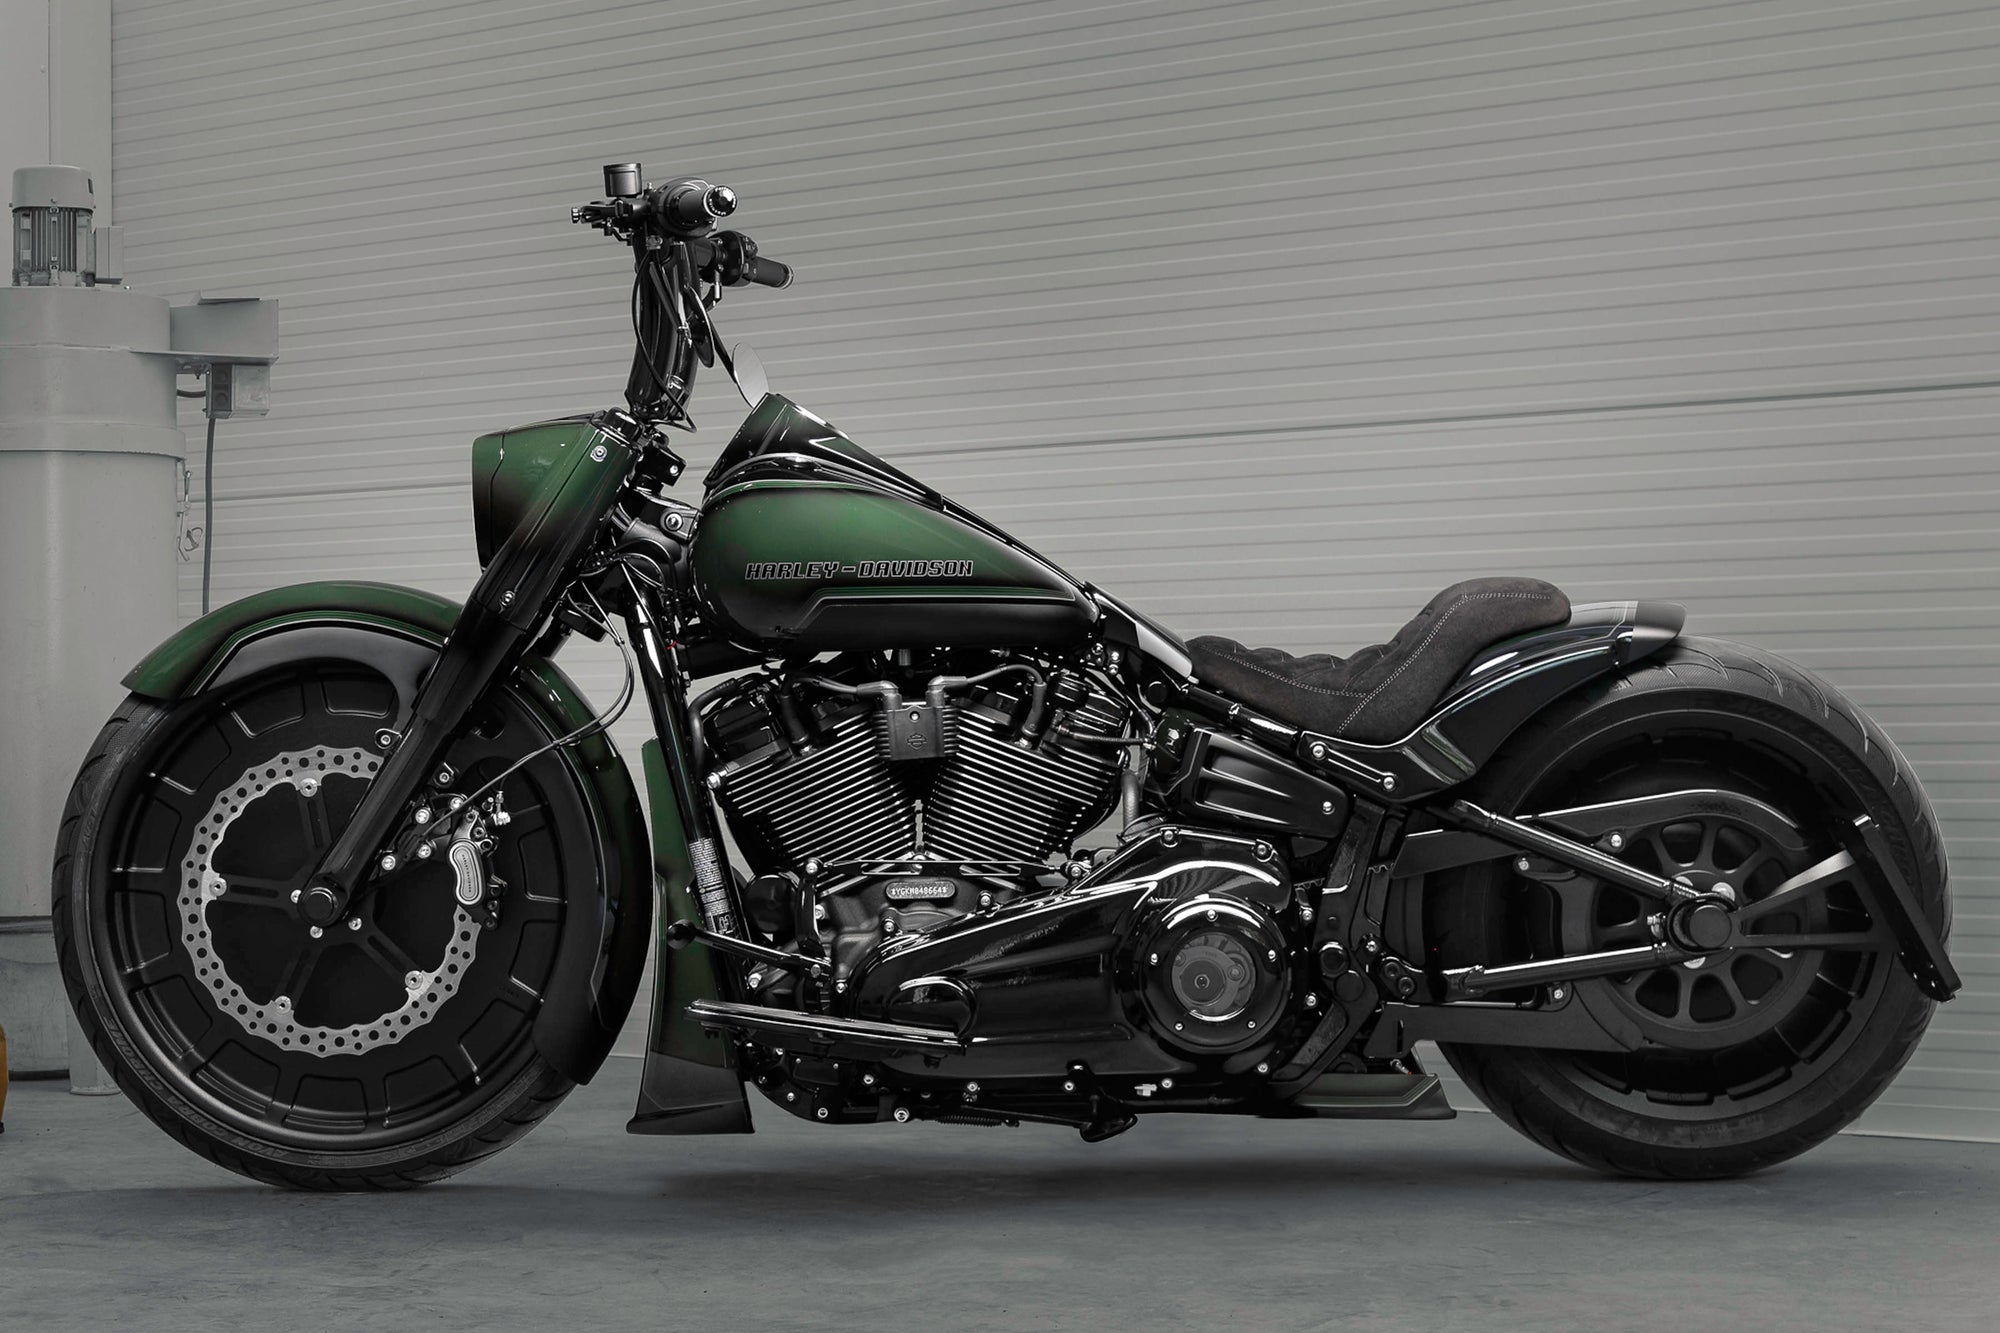 Harley Davidson motorcycle with Killer Custom parts from the side in a spacious and modern garage